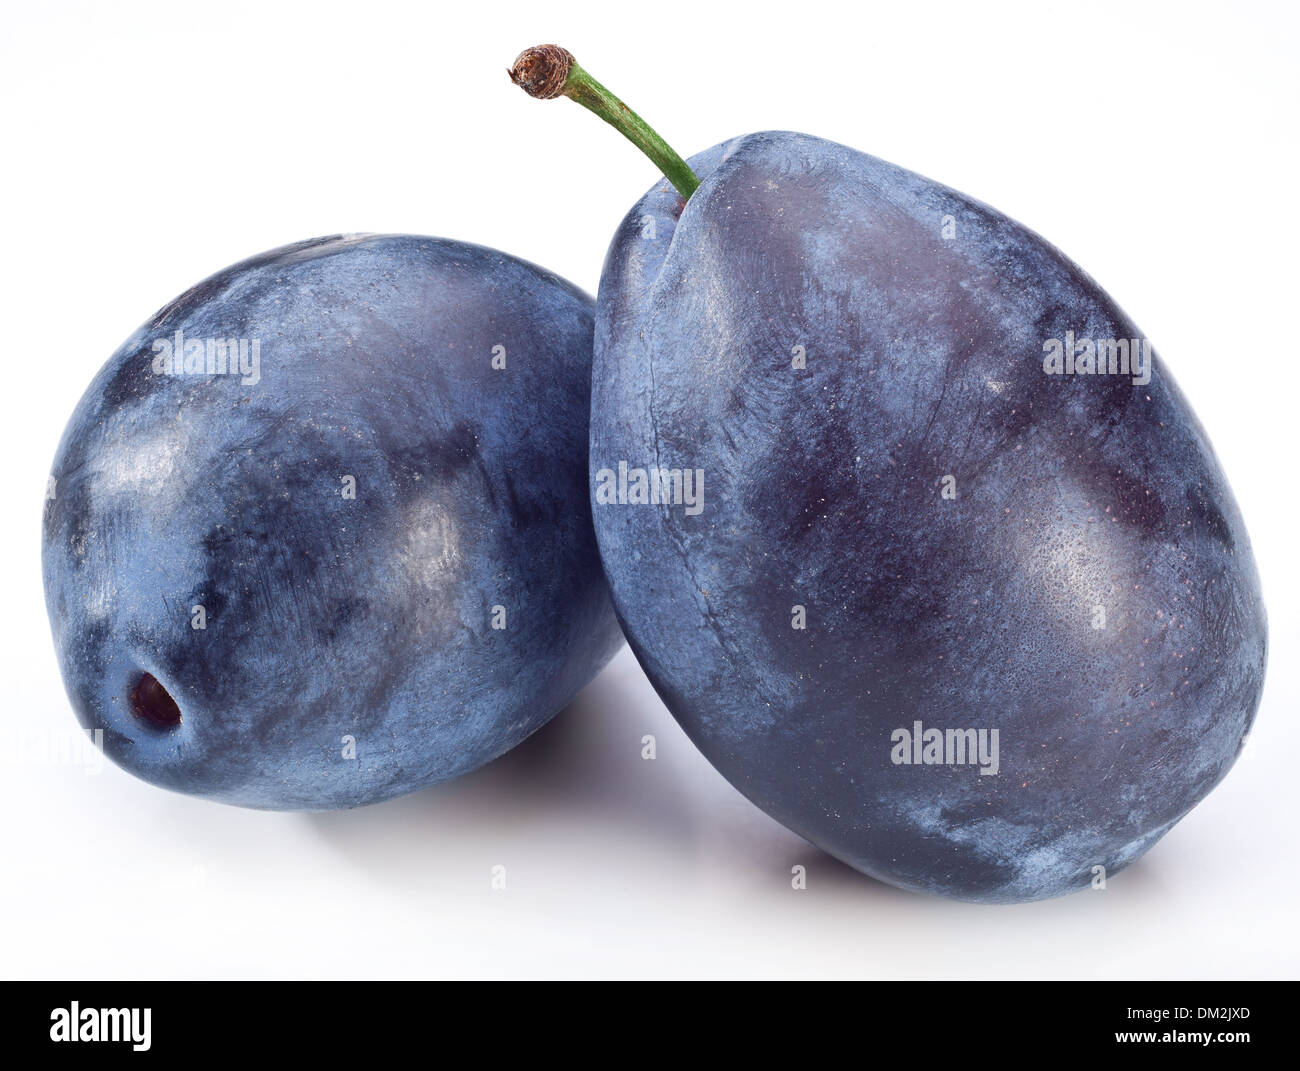 Two plums isolated on a white background. Stock Photo